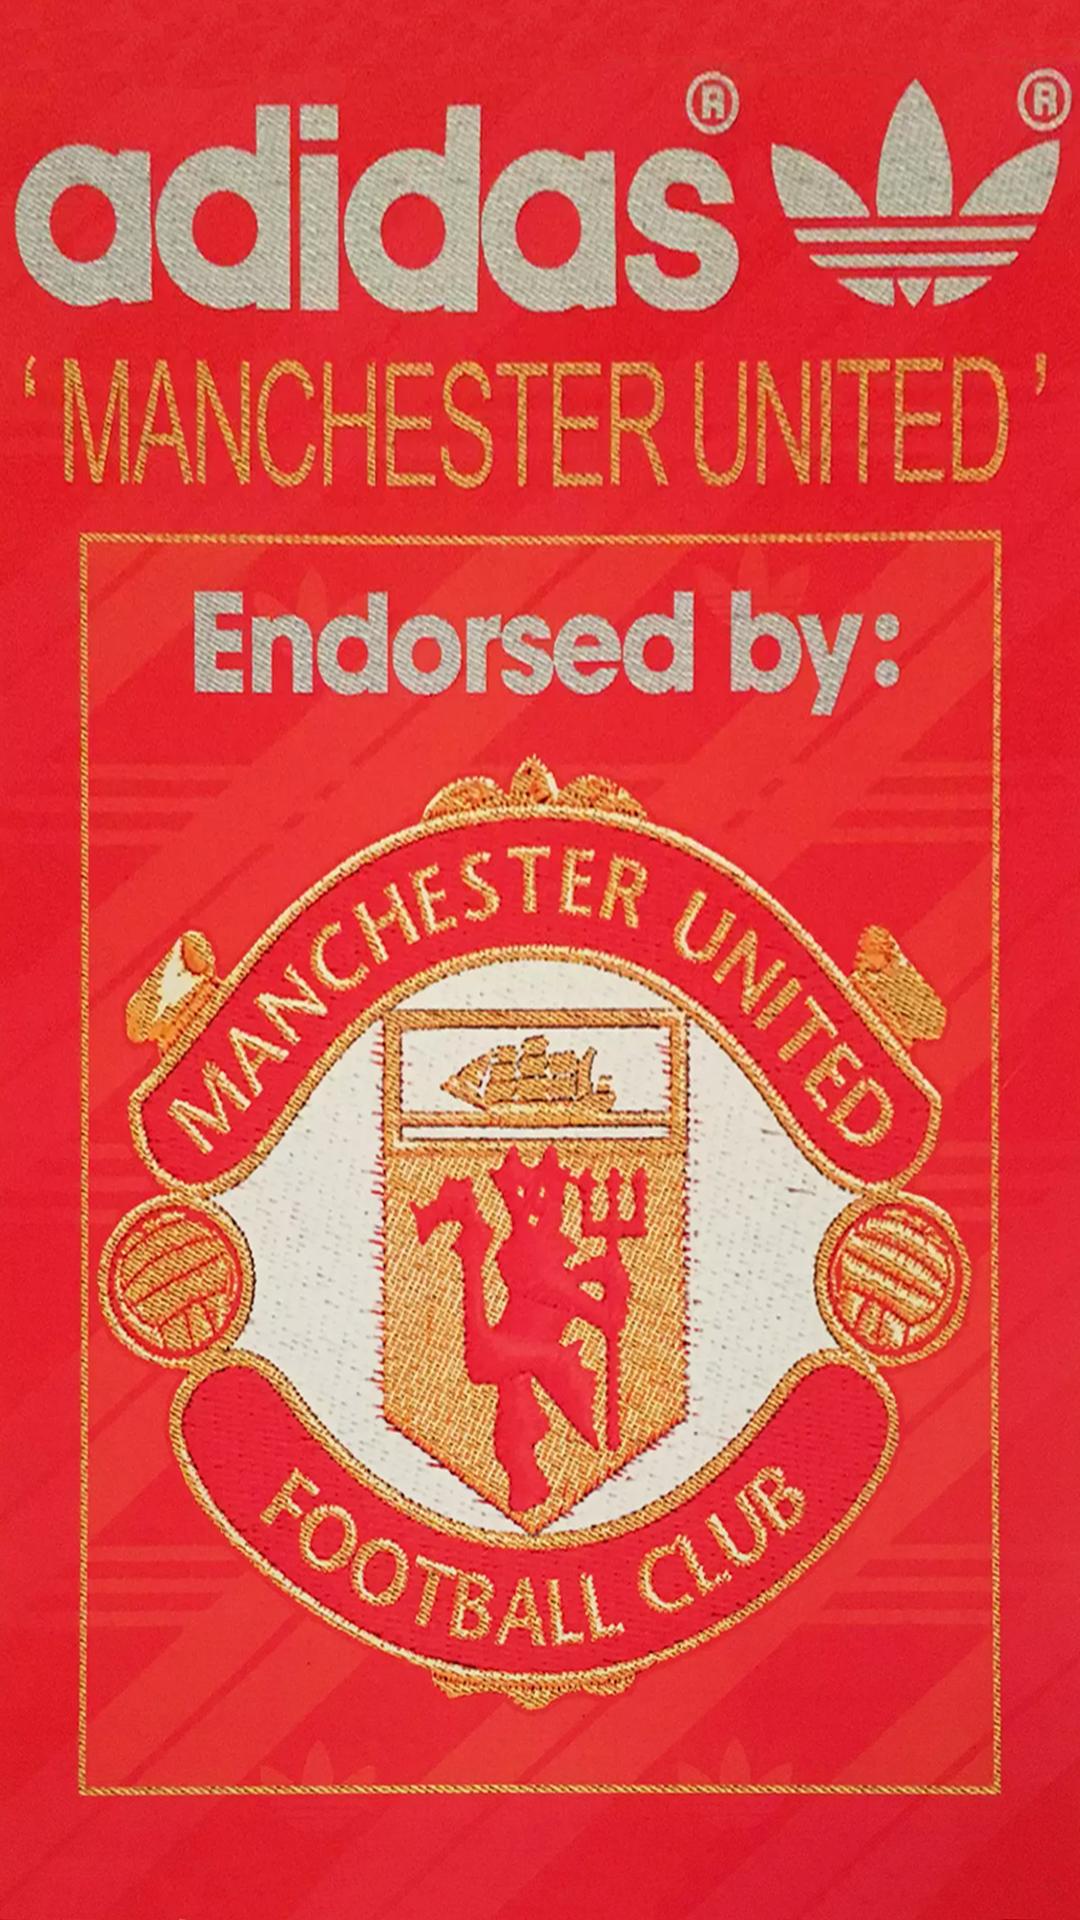 Manchester United Iphone Wallpaper - 7 Plus Wallpaper Iphone Manchester United - HD Wallpaper 